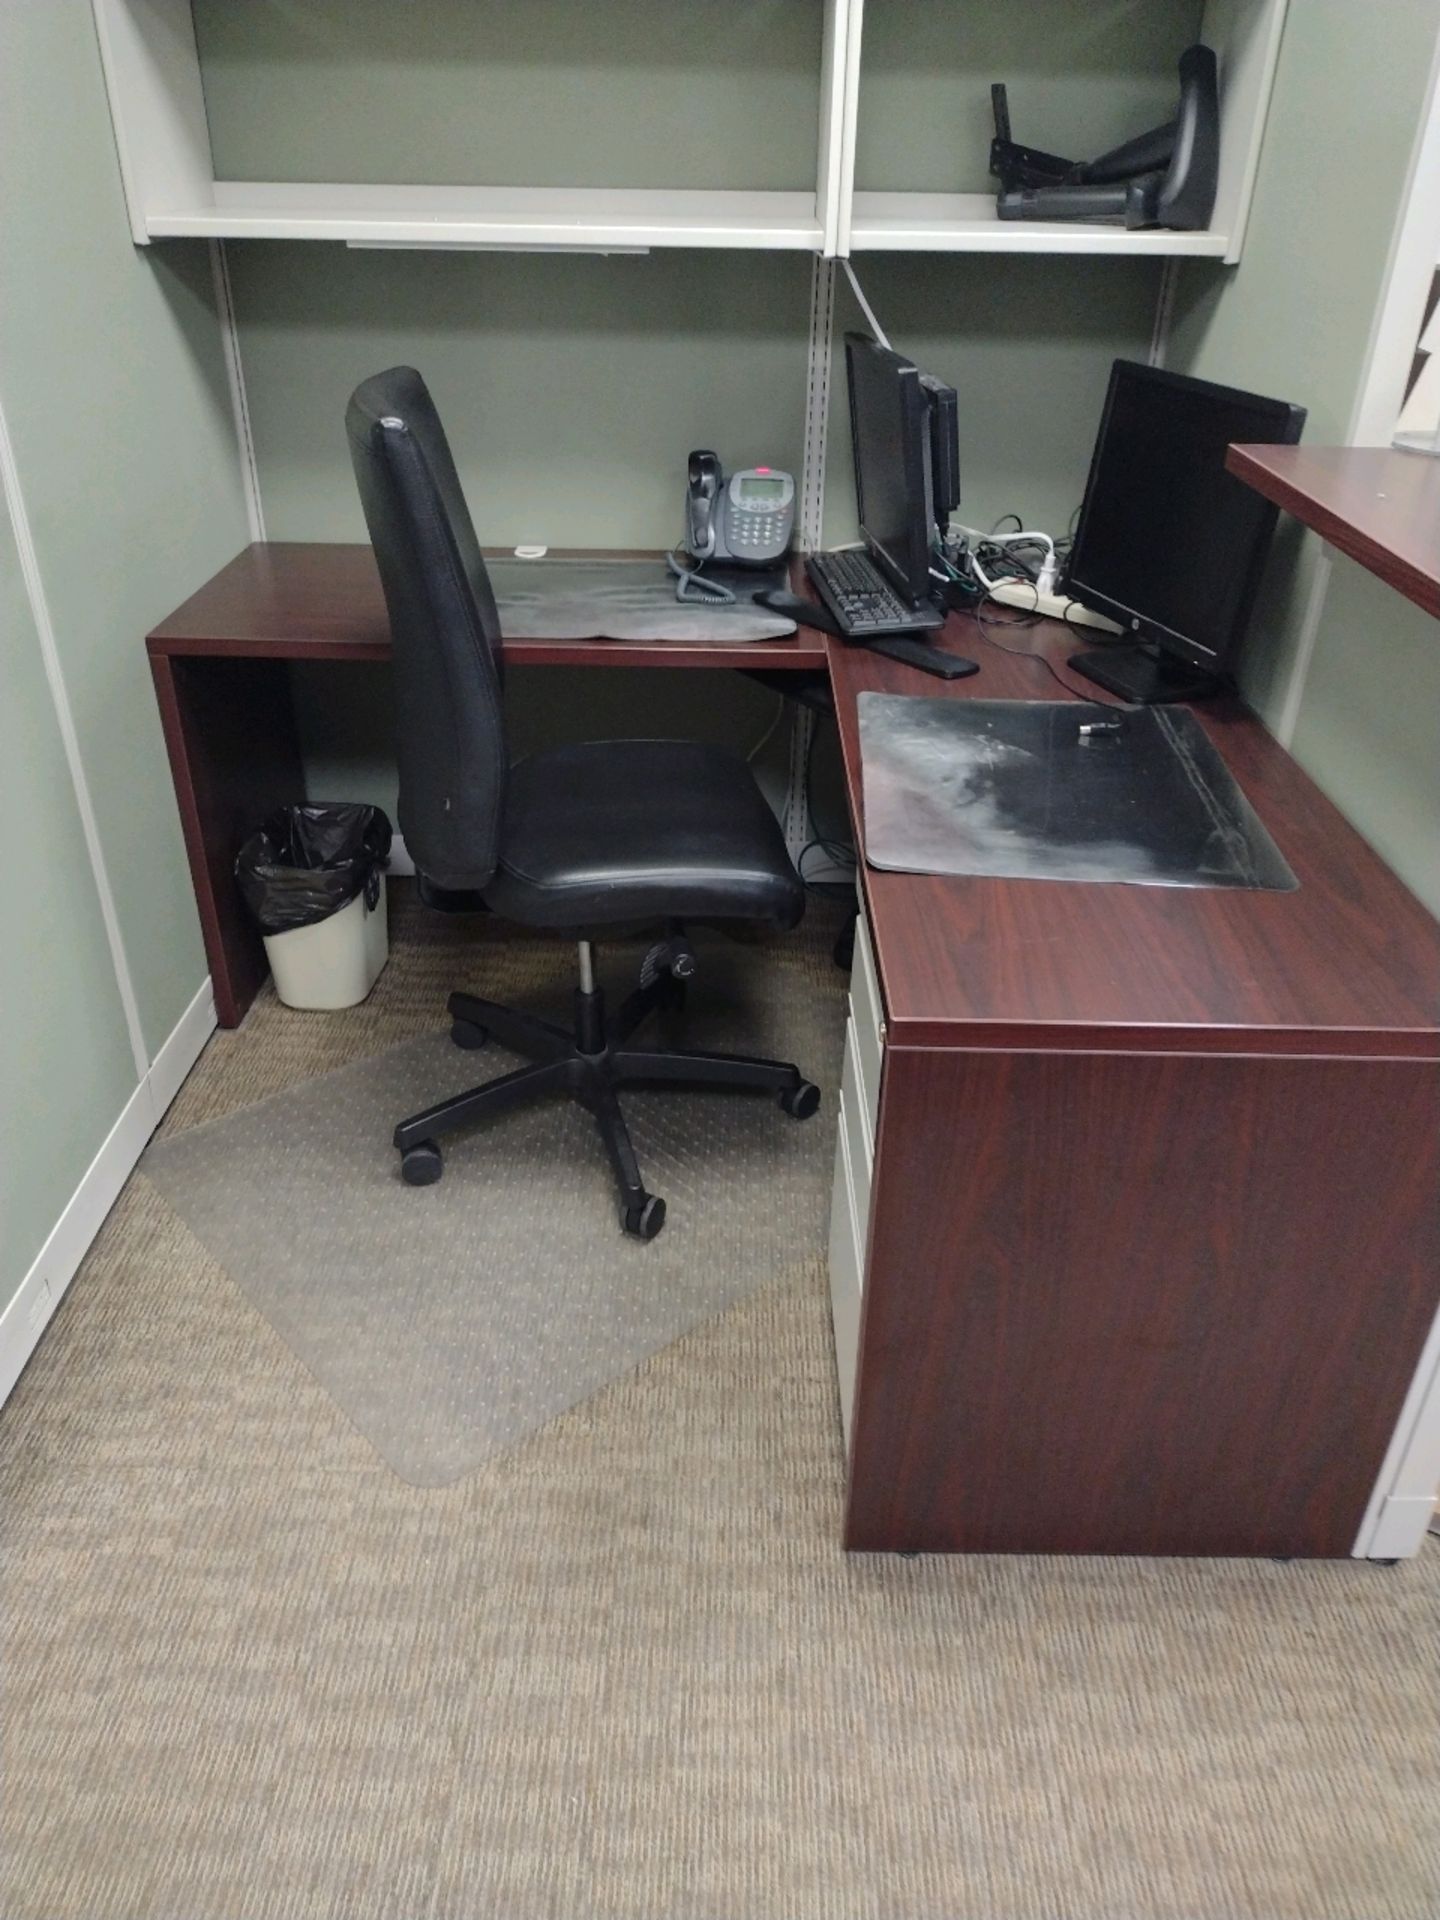 OFFICE SUITE TO INCLUDE: 8 WORK STATION MODULAR CUBICLE SYSTEM WITH CHAIRS, PRINTERS, MONITORS, - Image 7 of 16